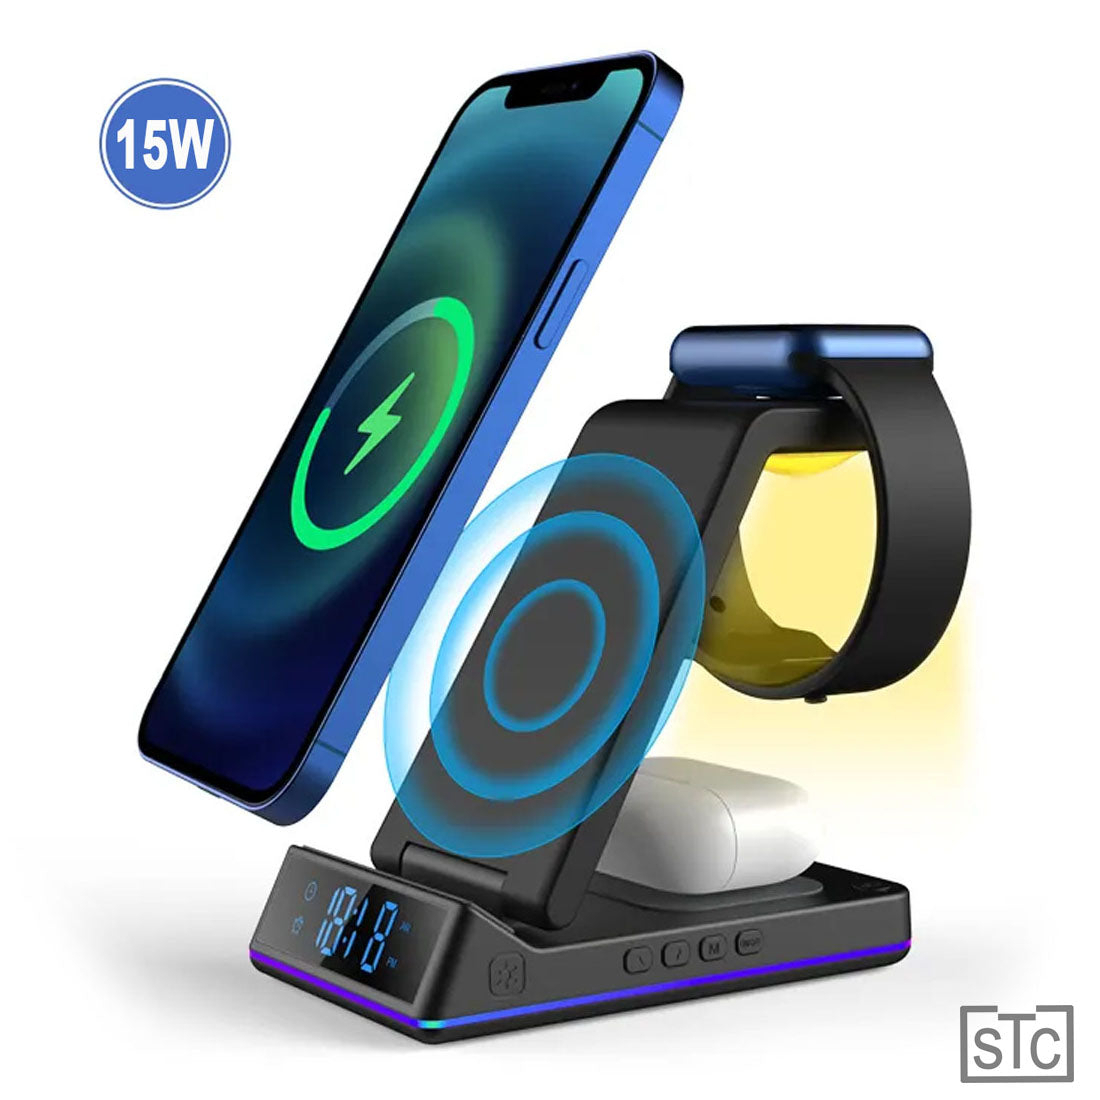 3 In 1 Wireless Charger With Clock/Alarm And Night Light,15W Fast Charging Station Compatible With IPhone , AirPods And IWatch